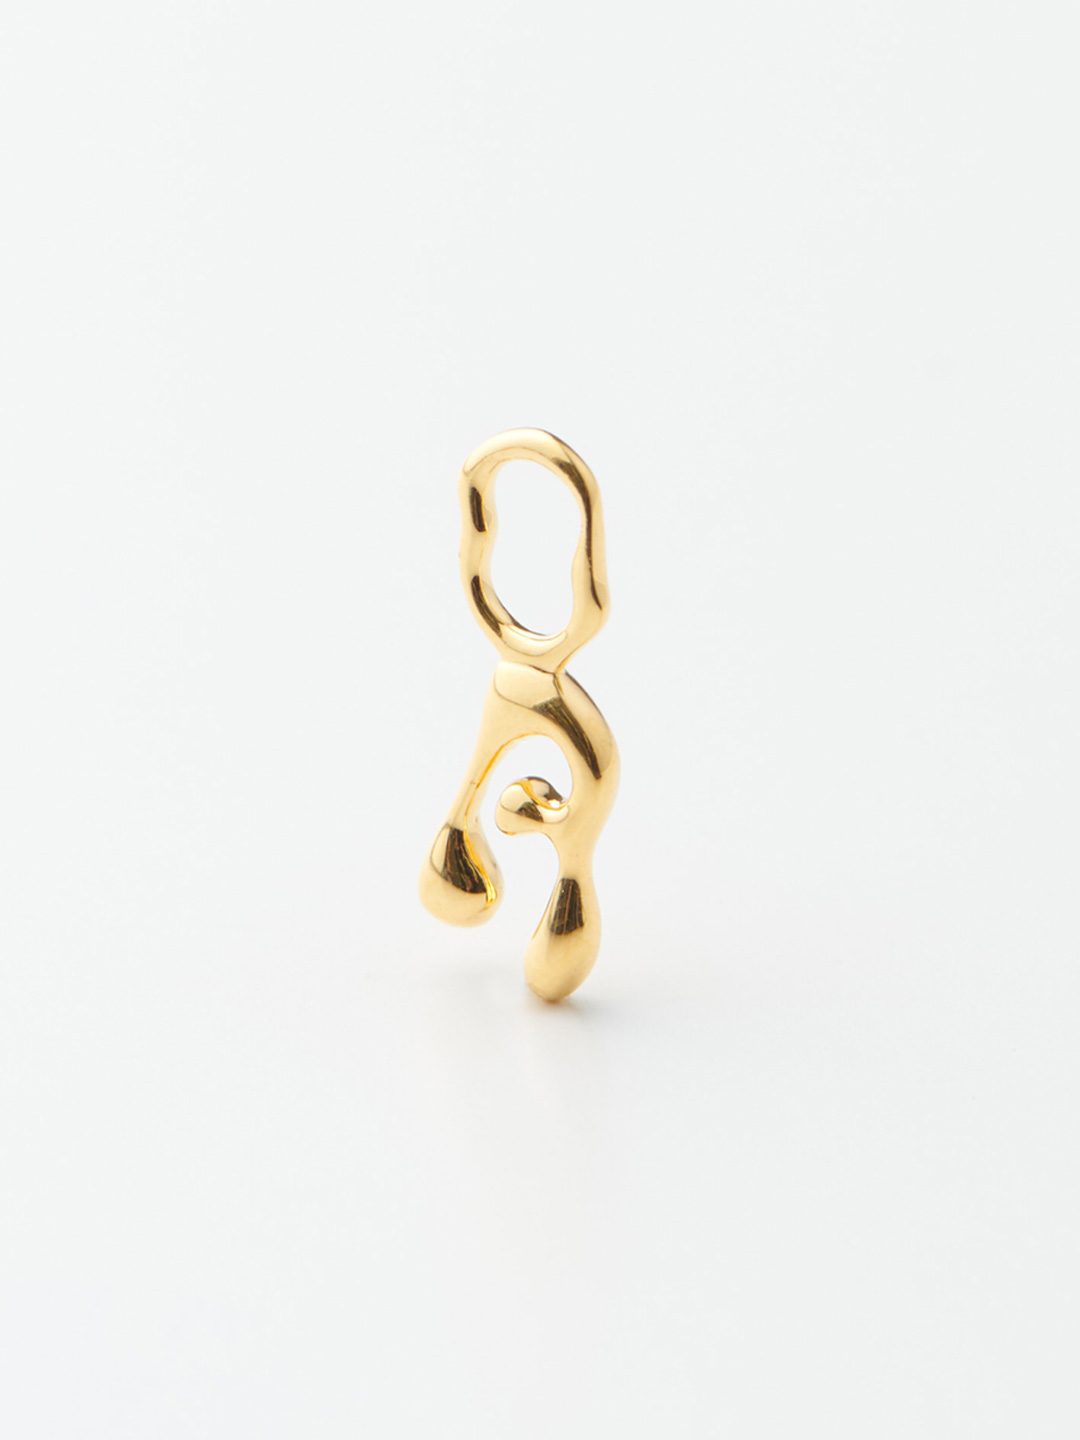 Fluent Letter A Charm - Yellow Gold